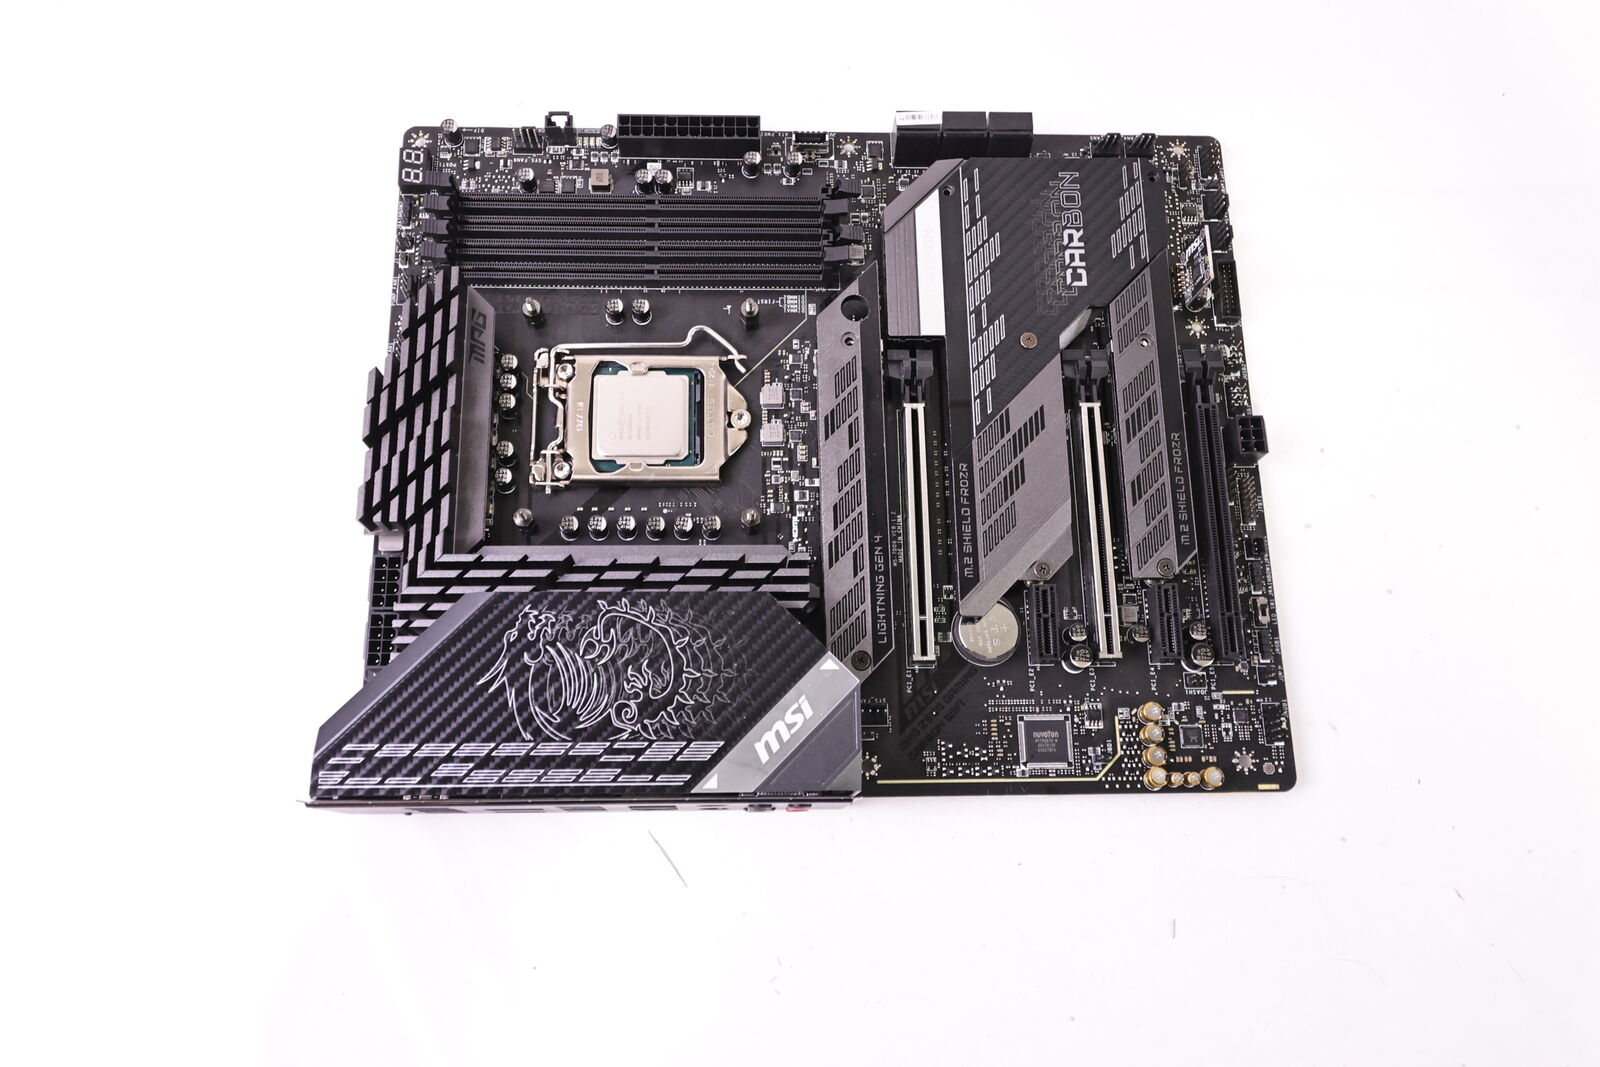 MSI MPG Z590 GAMING CARBON MOTHERBOARD W/ CORE I9-10900K 3.7GHZ PROCESSOR